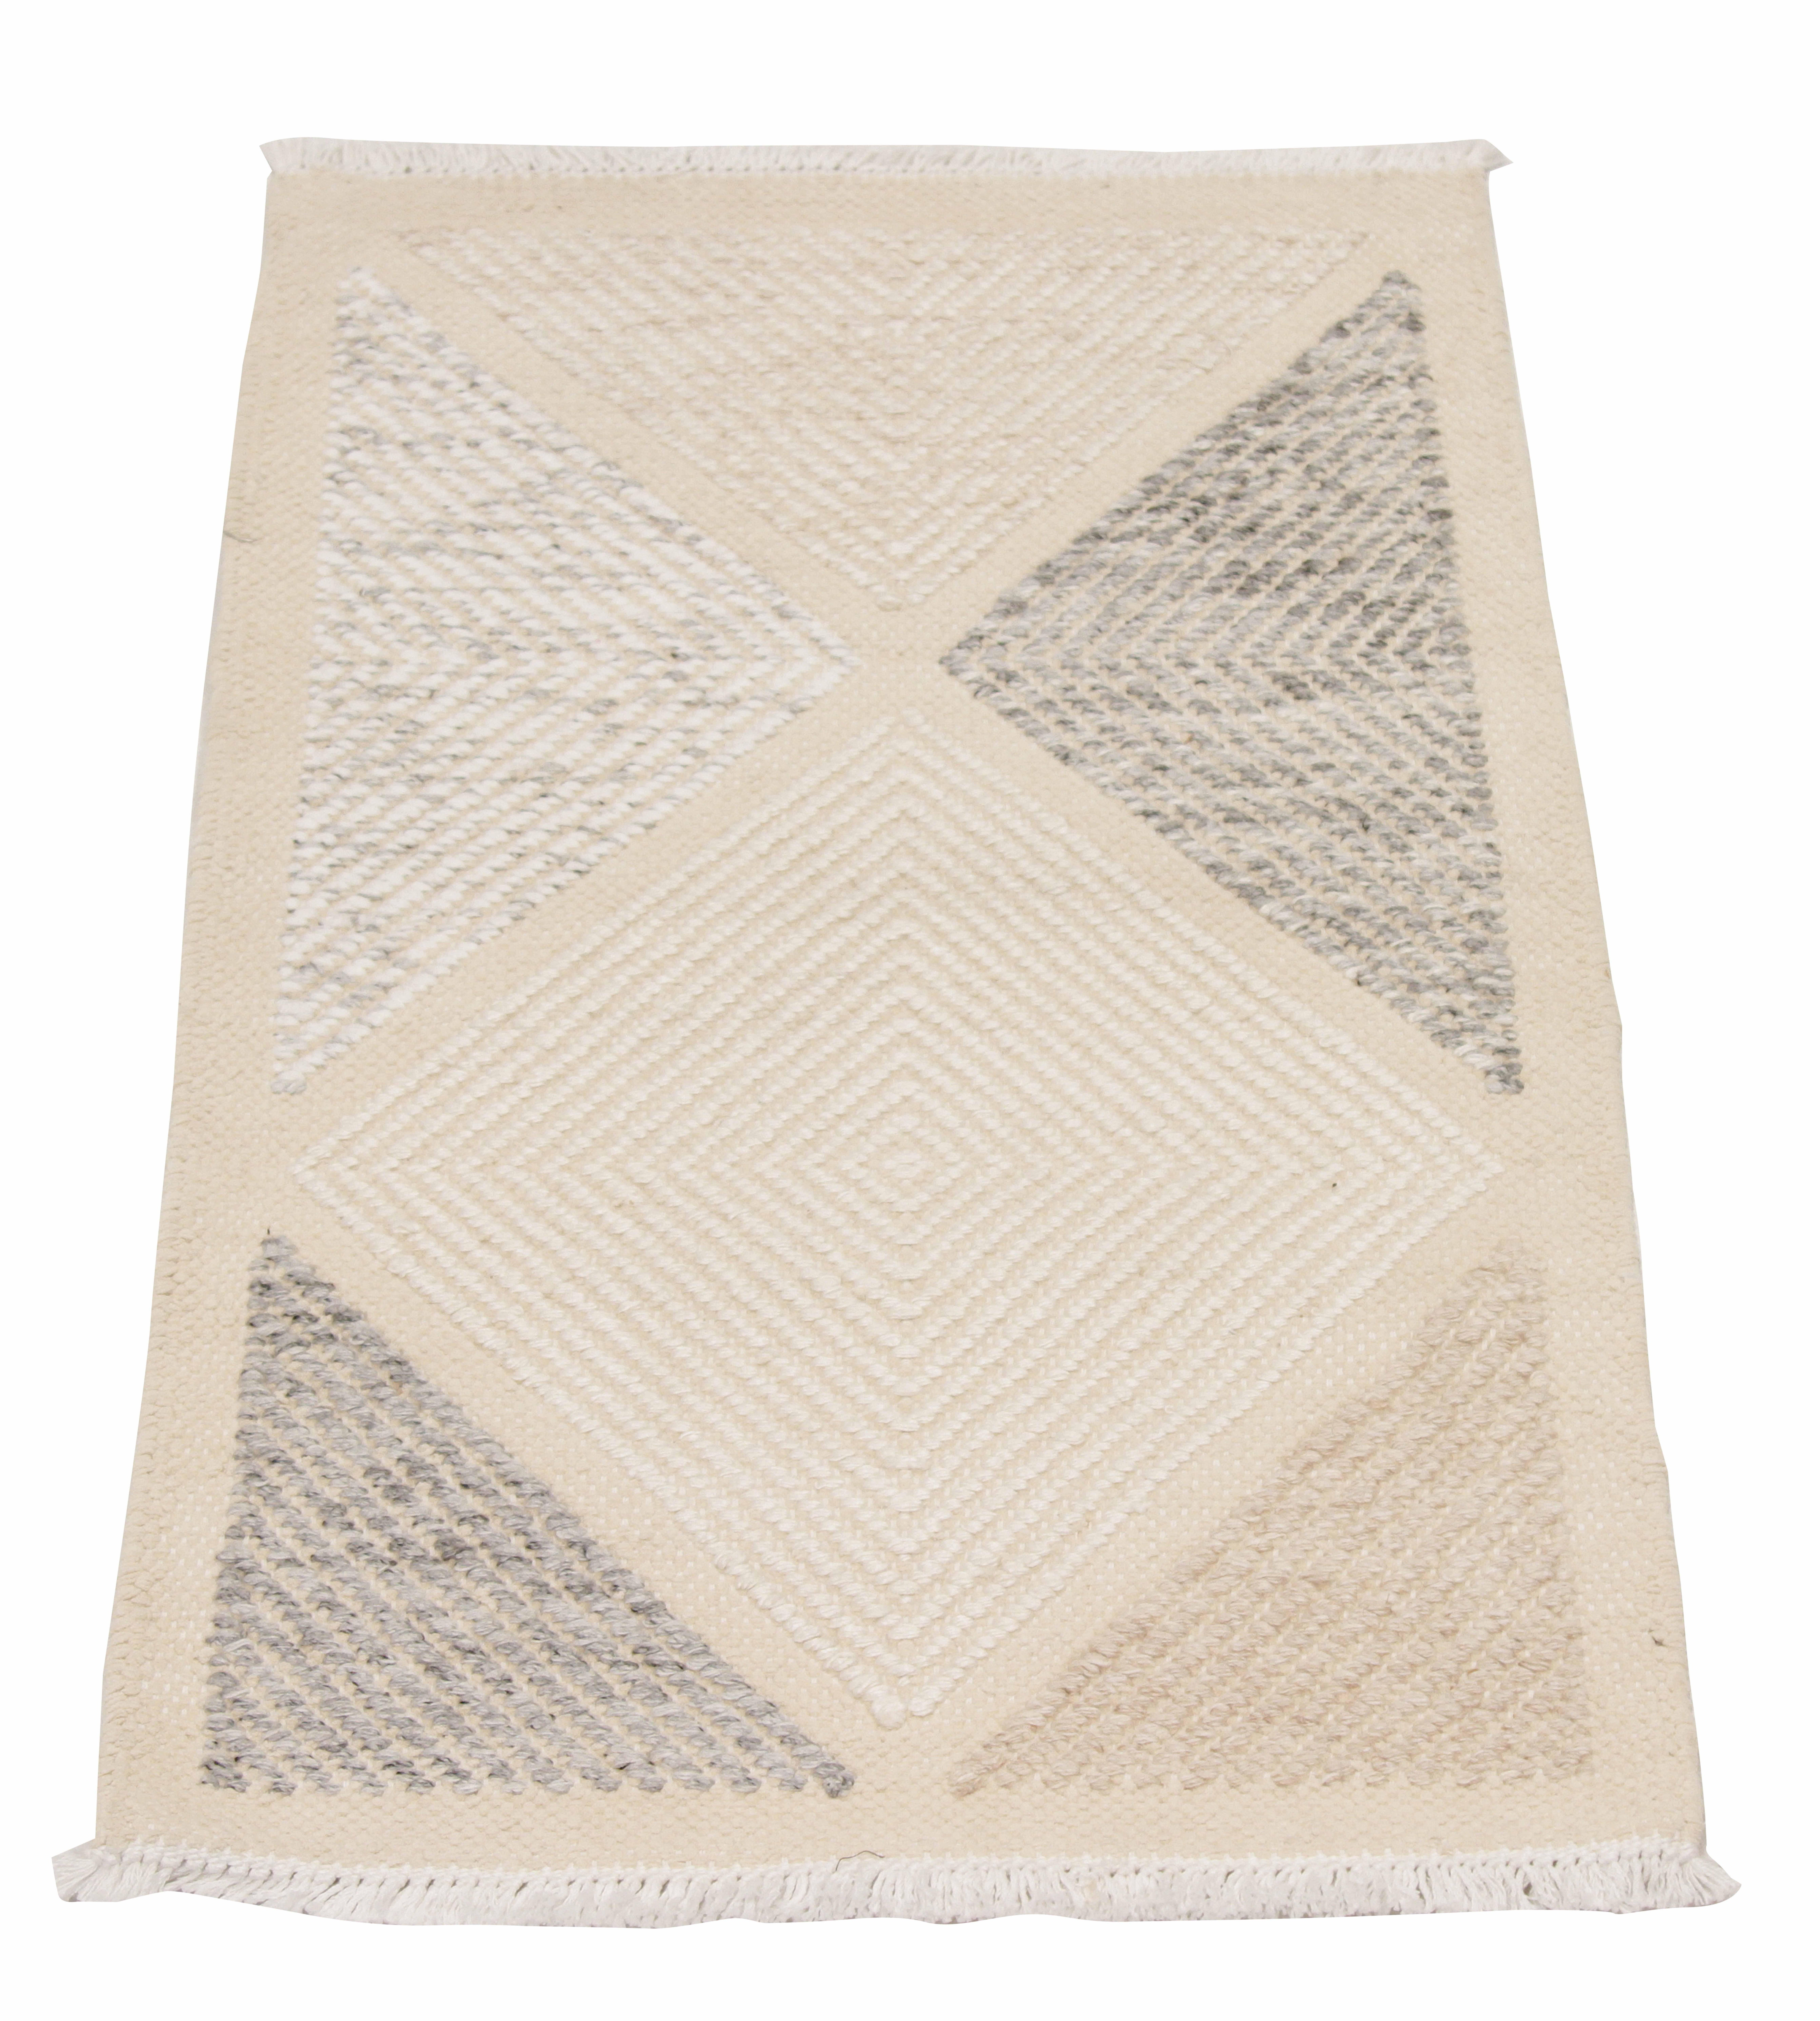 Modern area rug handwoven from the finest sheep’s wool. It’s colored with all-natural vegetable dyes that are safe for humans and pets. It’s a traditional Swedish design handwoven by expert artisans. It’s a lovely area rug that can be incorporated